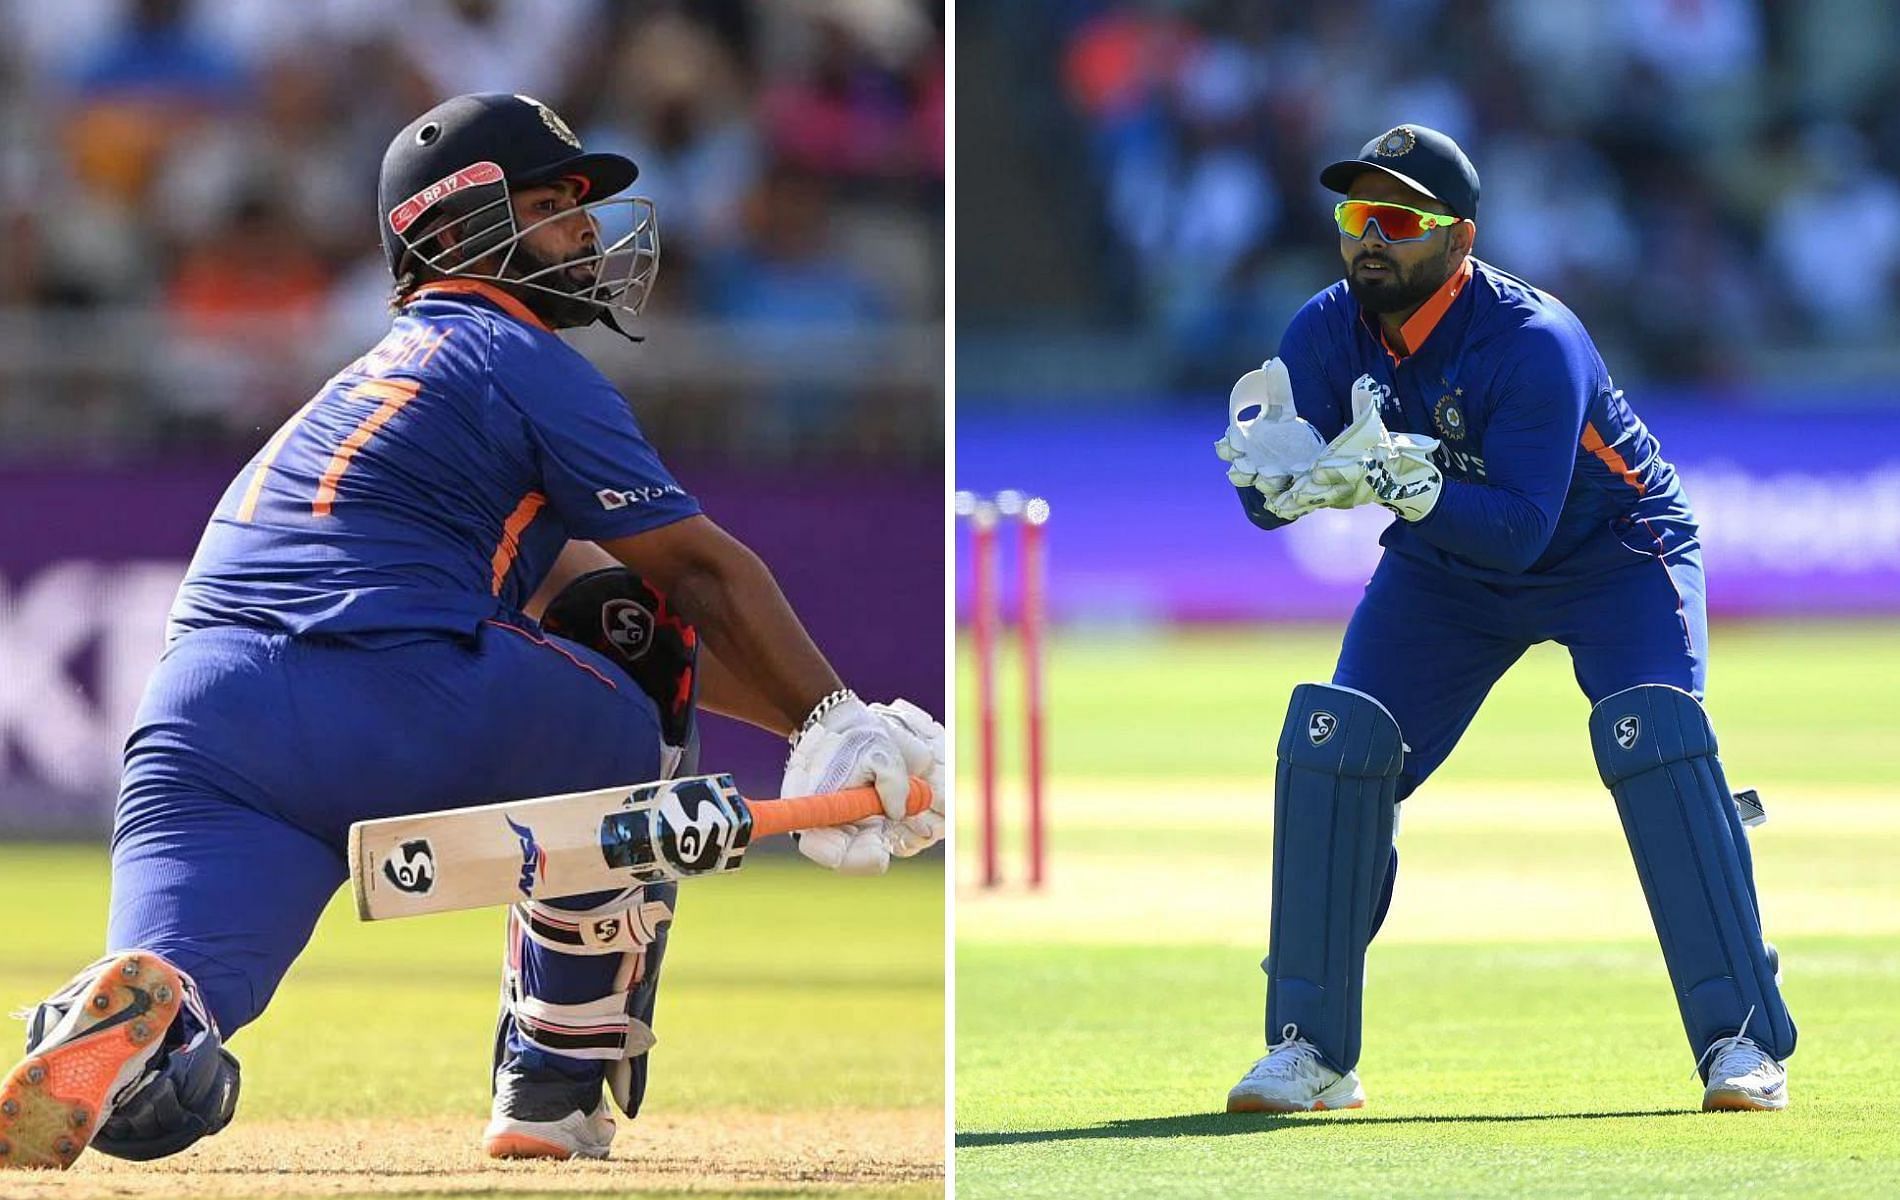 Rishabh Pant is one of the most dangerous batters in world cricket right now